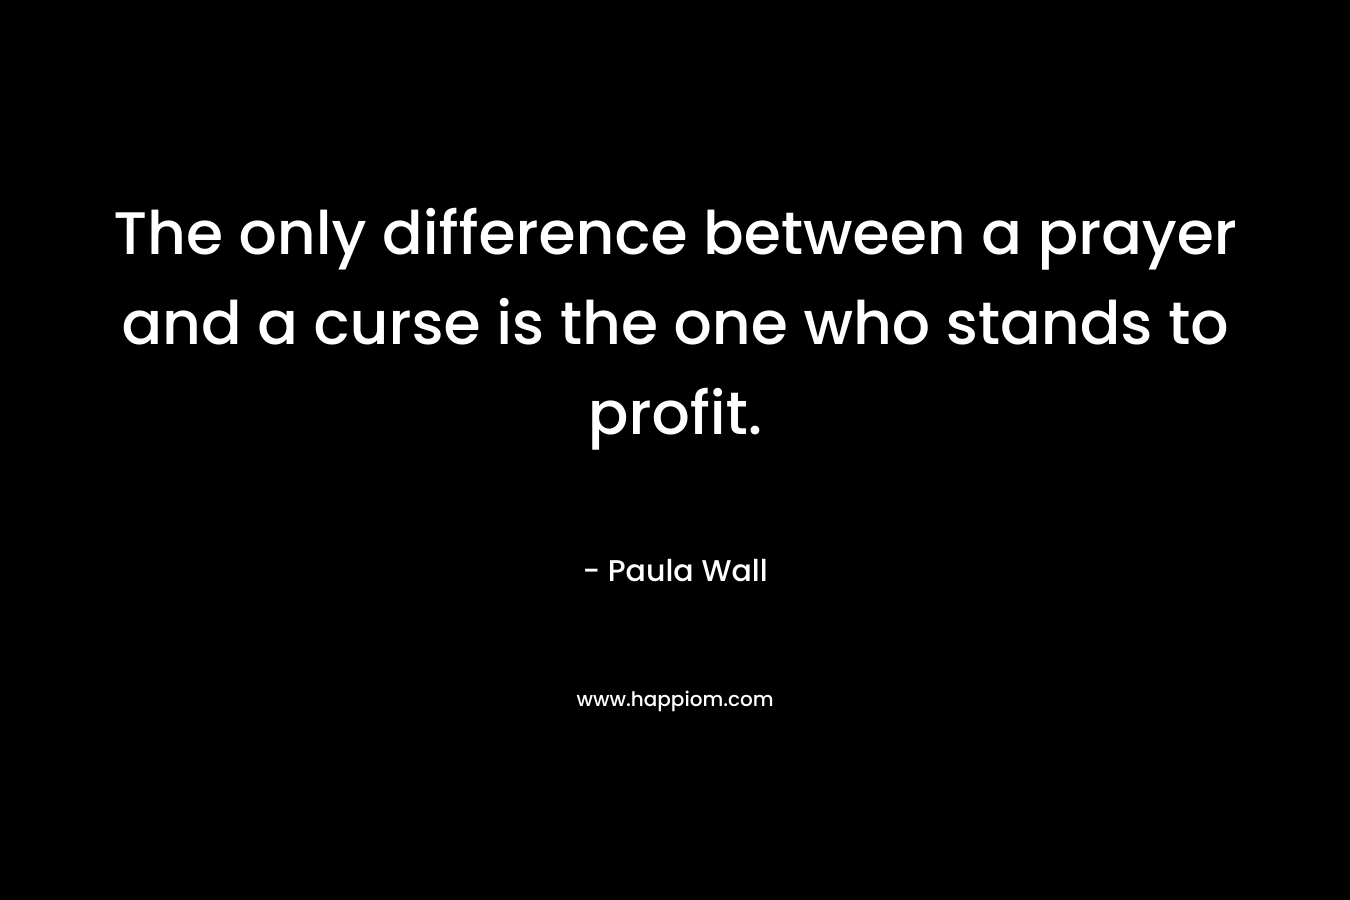 The only difference between a prayer and a curse is the one who stands to profit. – Paula Wall